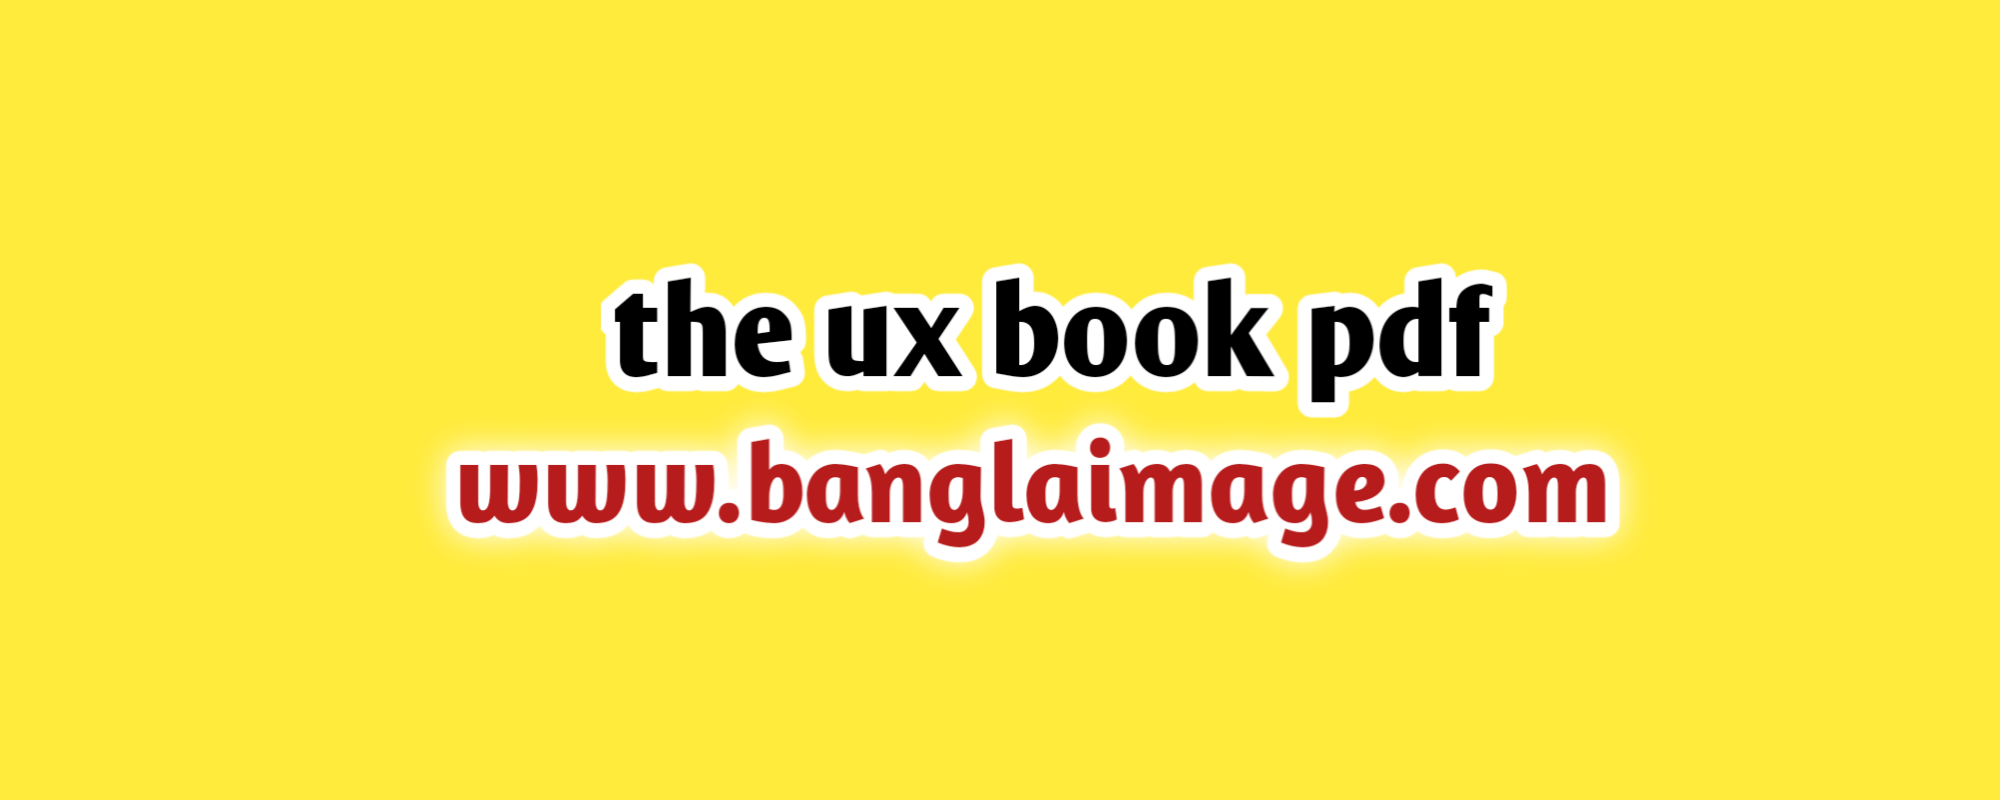 the ux book pdf, the ux book agile ux design for a quality user, the ux book 2nd edition pdf, the the ux book agile ux design for a quality user